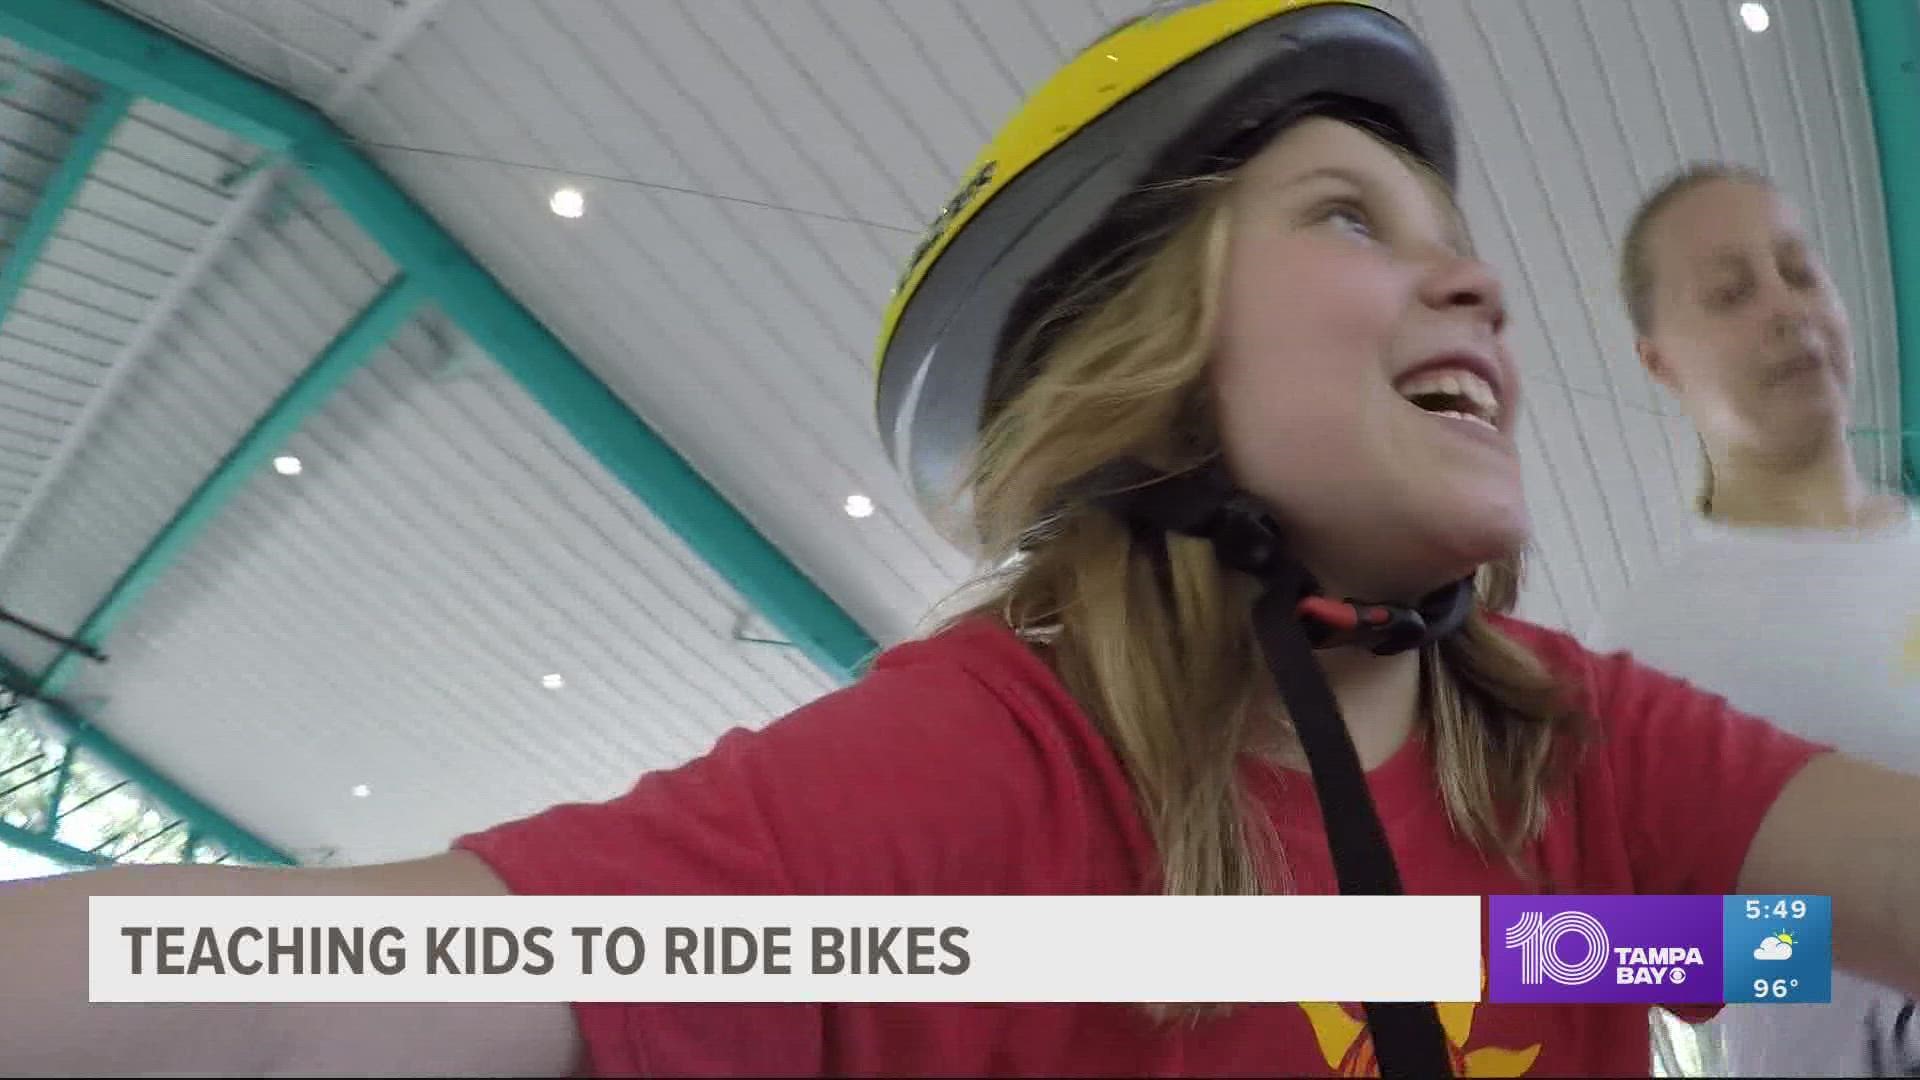 The camp travels across the U.S. teaching children with special needs and disabilities how to ride a bike on their own.